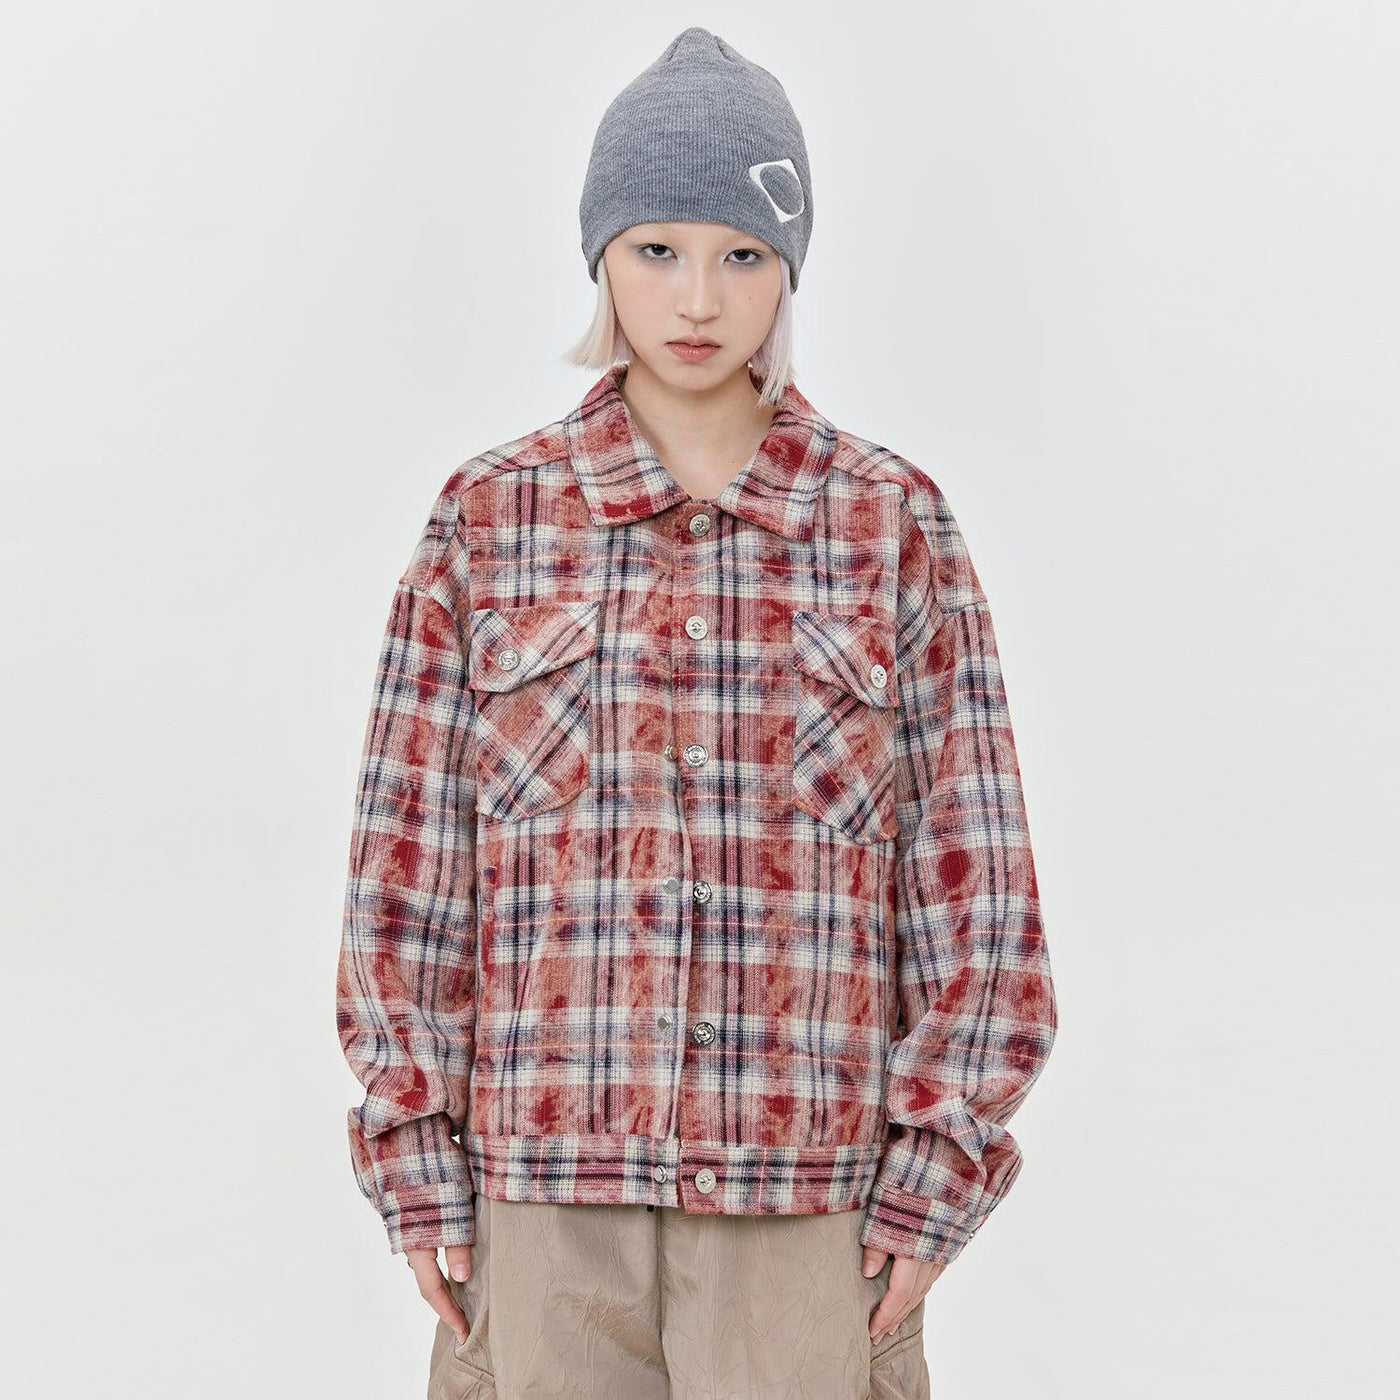 Made Extreme Classic Flap Pocket Plaid Outer Shirt Korean Street Fashion Shirt By Made Extreme Shop Online at OH Vault